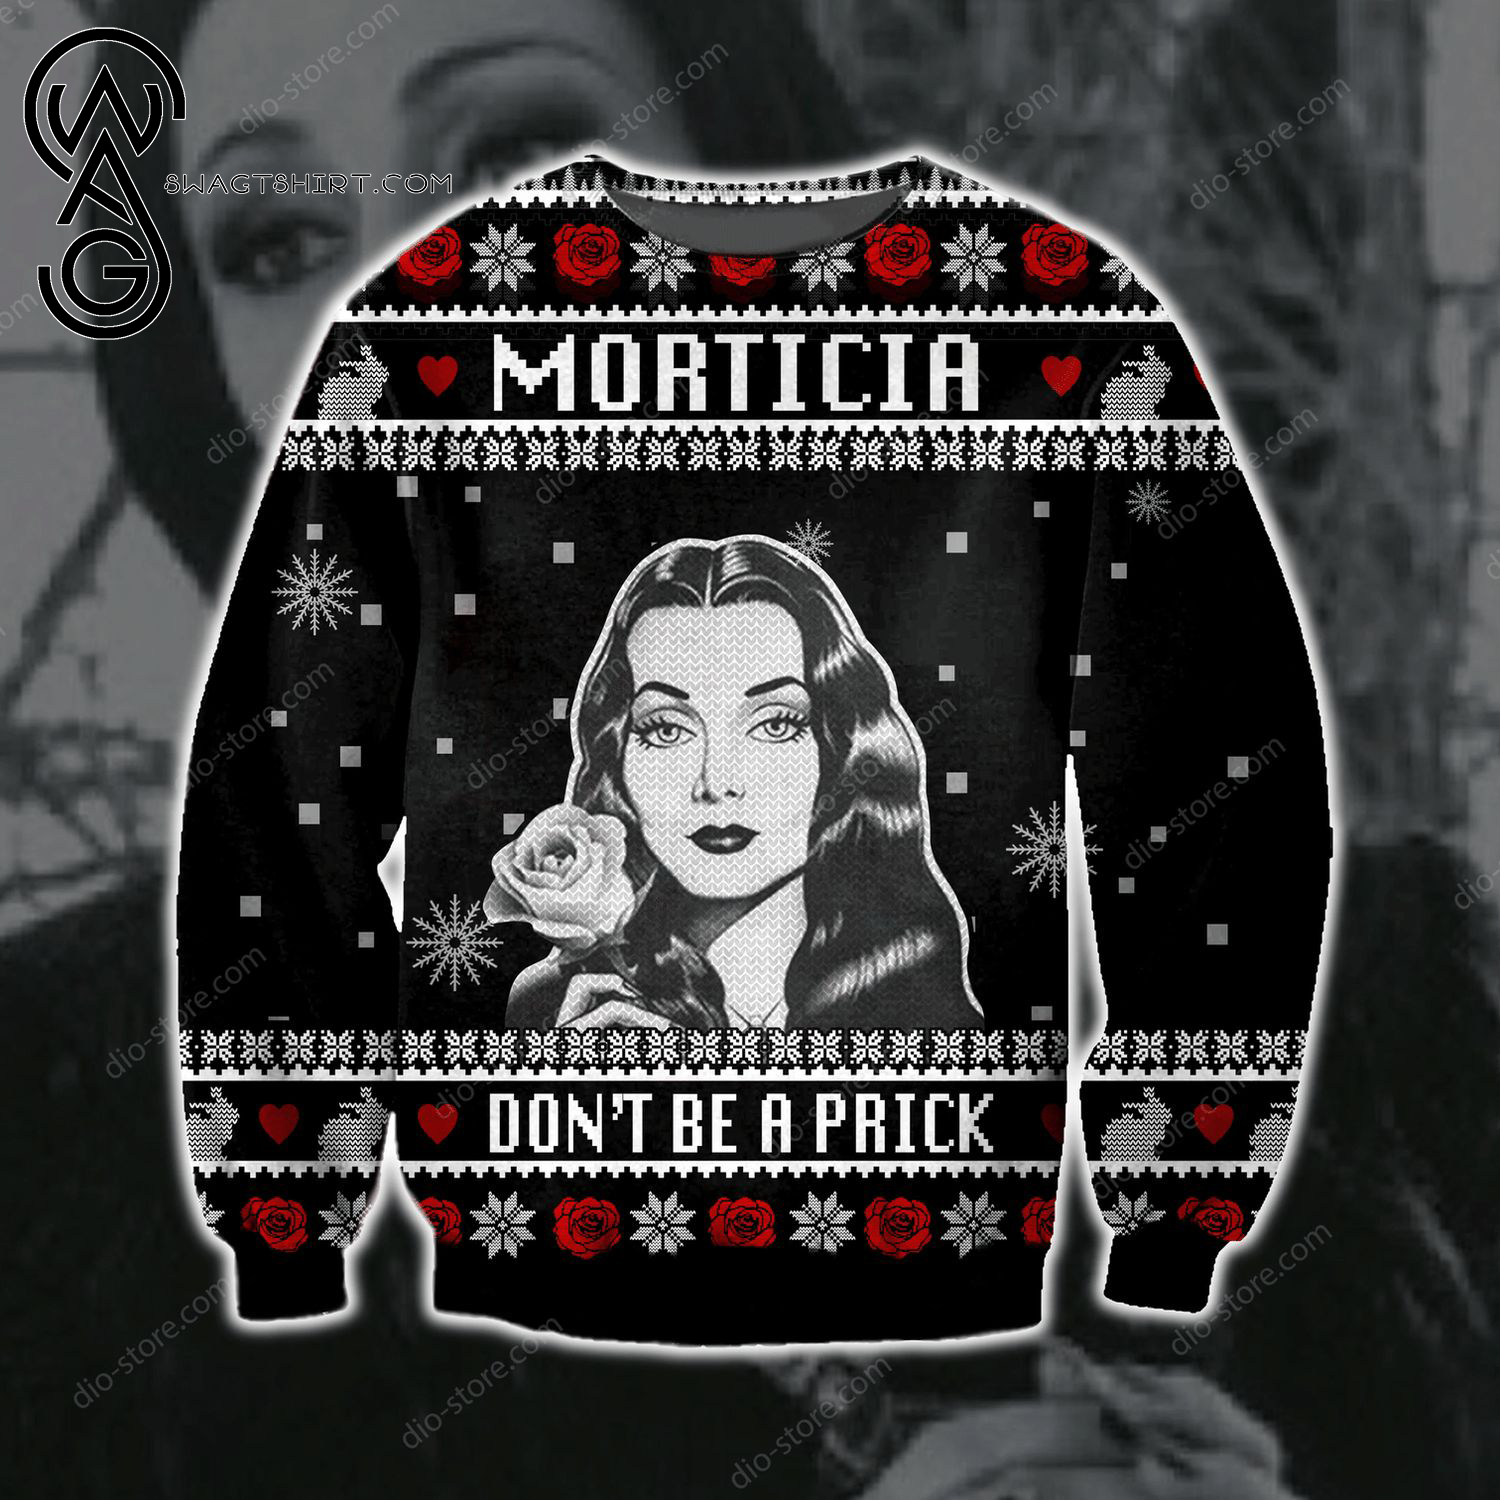 Morticia Don't Be A Prick Full Print Ugly Christmas Sweater